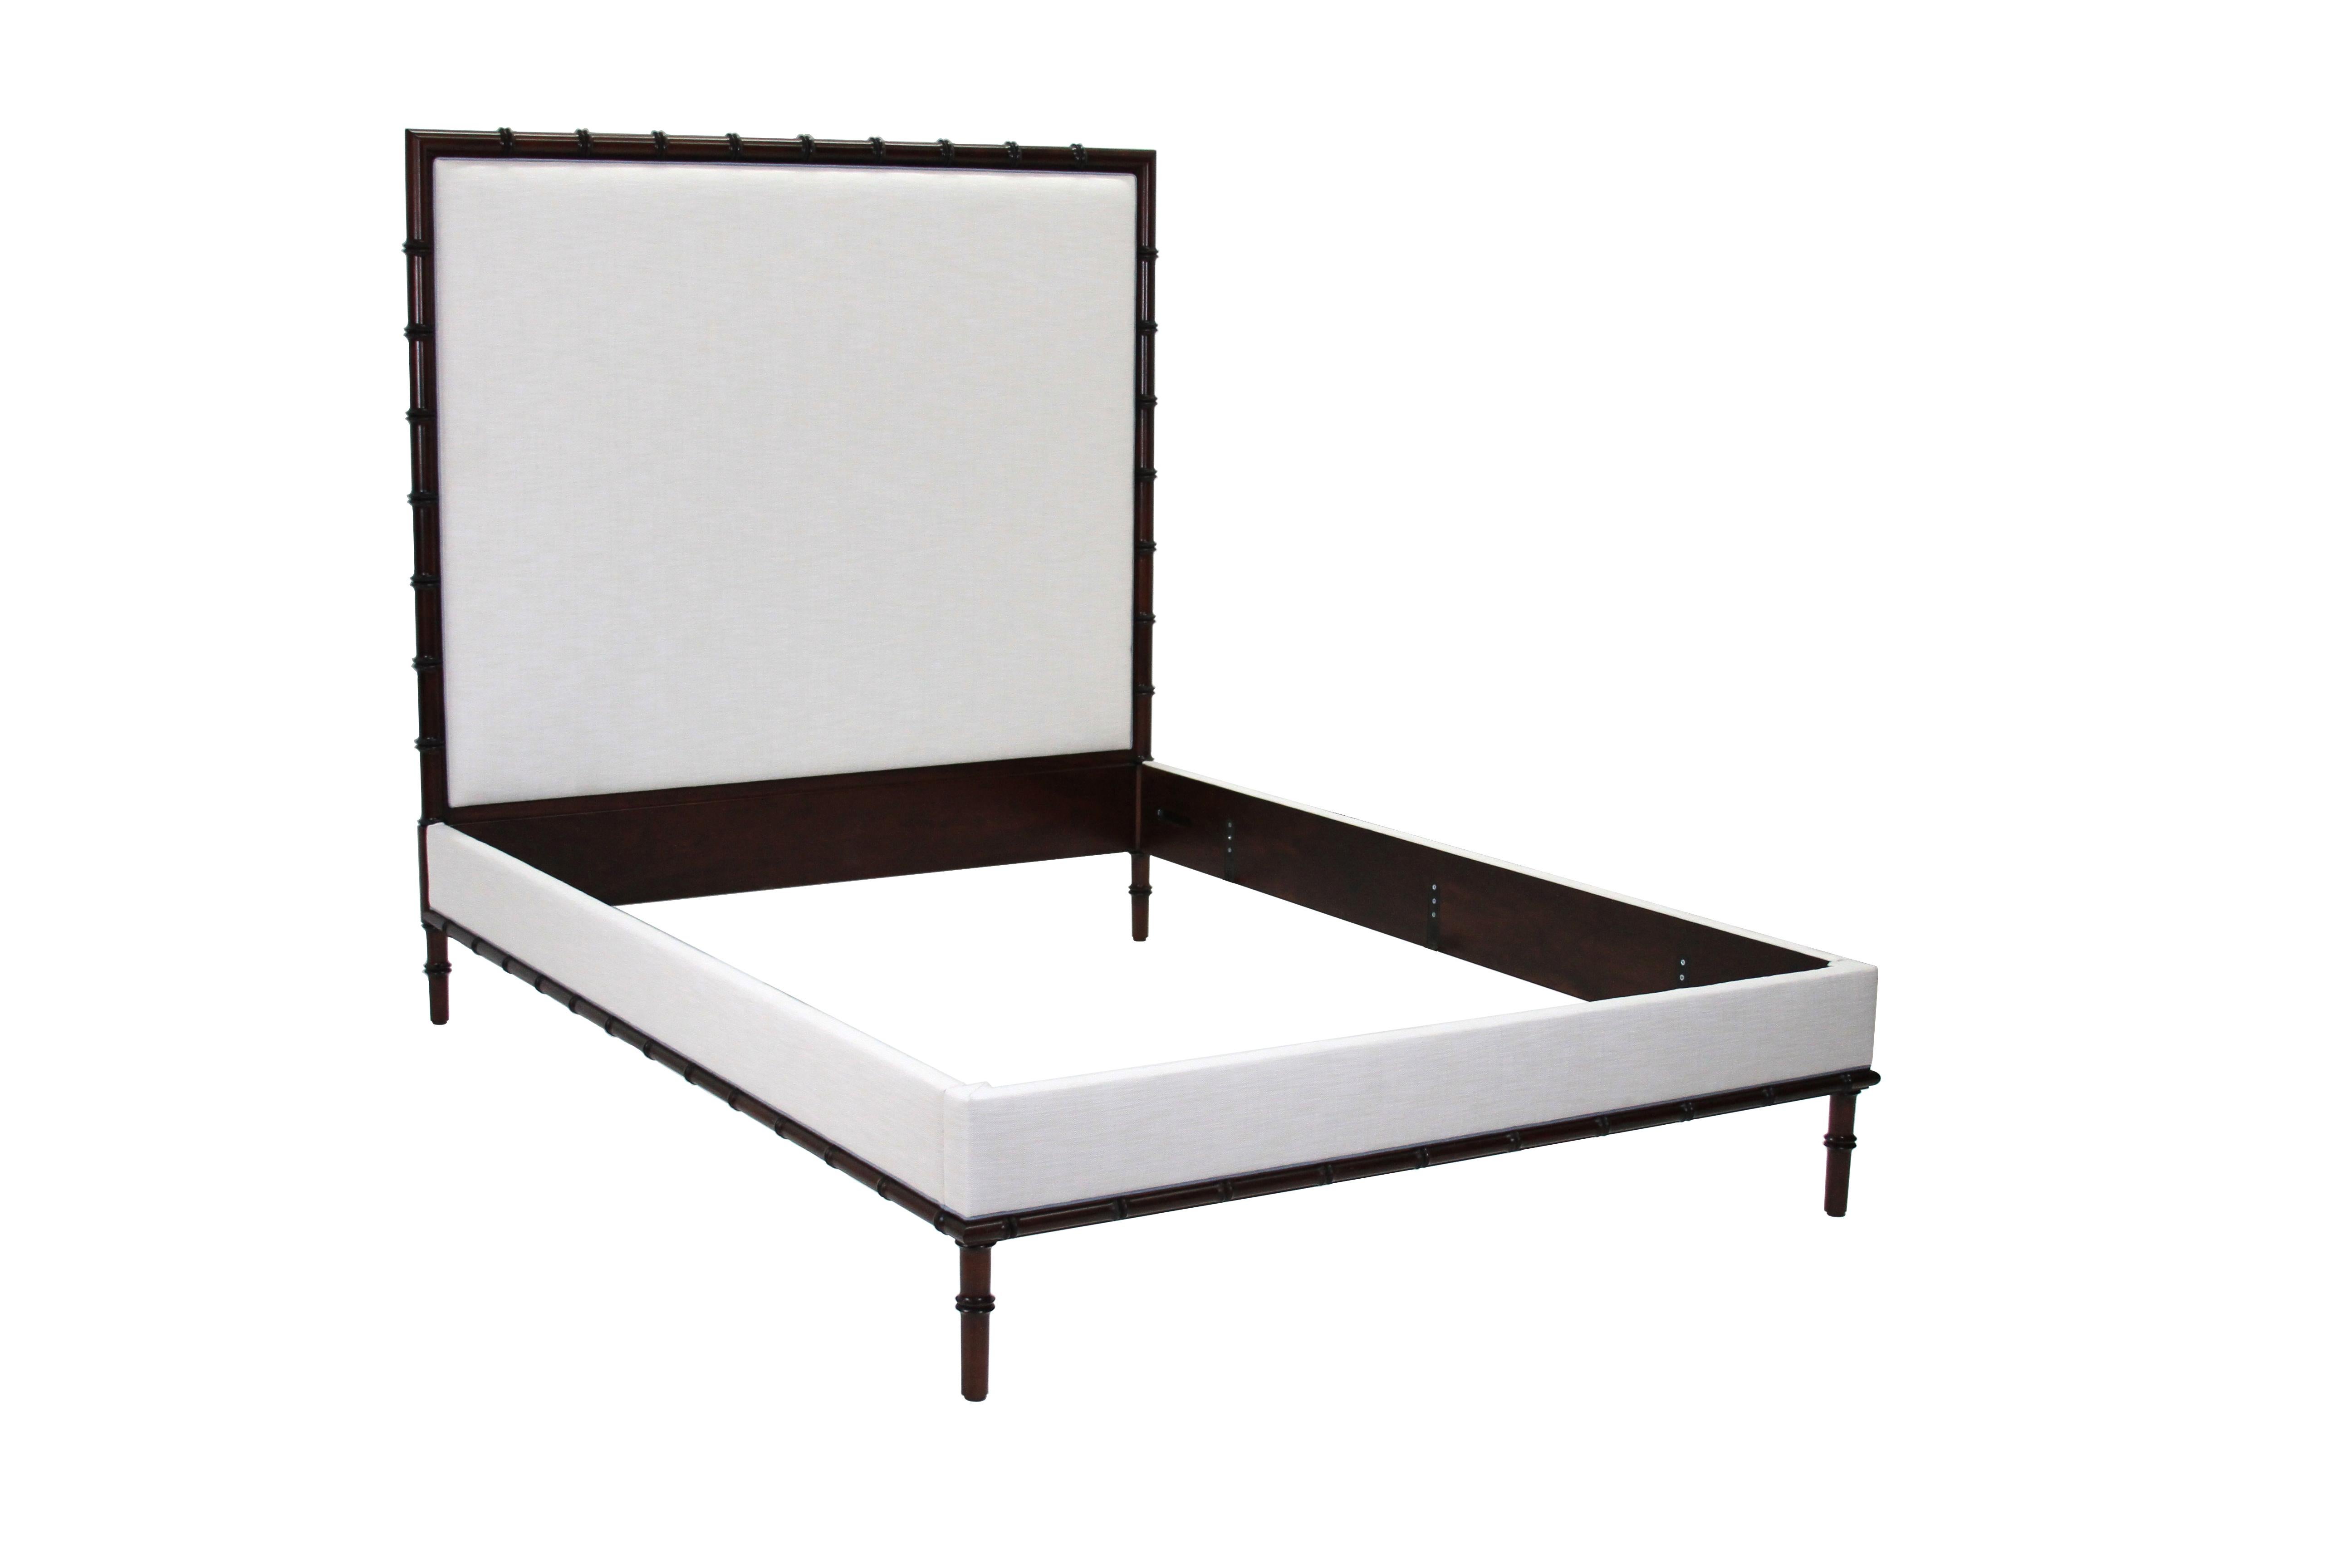 The Bamboo upholstered bed is a beautiful hybrid of a traditional bamboo style bed with the comfort of an uhpolstered headboard, footboard and siderails. Shown in solid Mahogany it is available in multiple wood types, sizes and finishes. This bed is